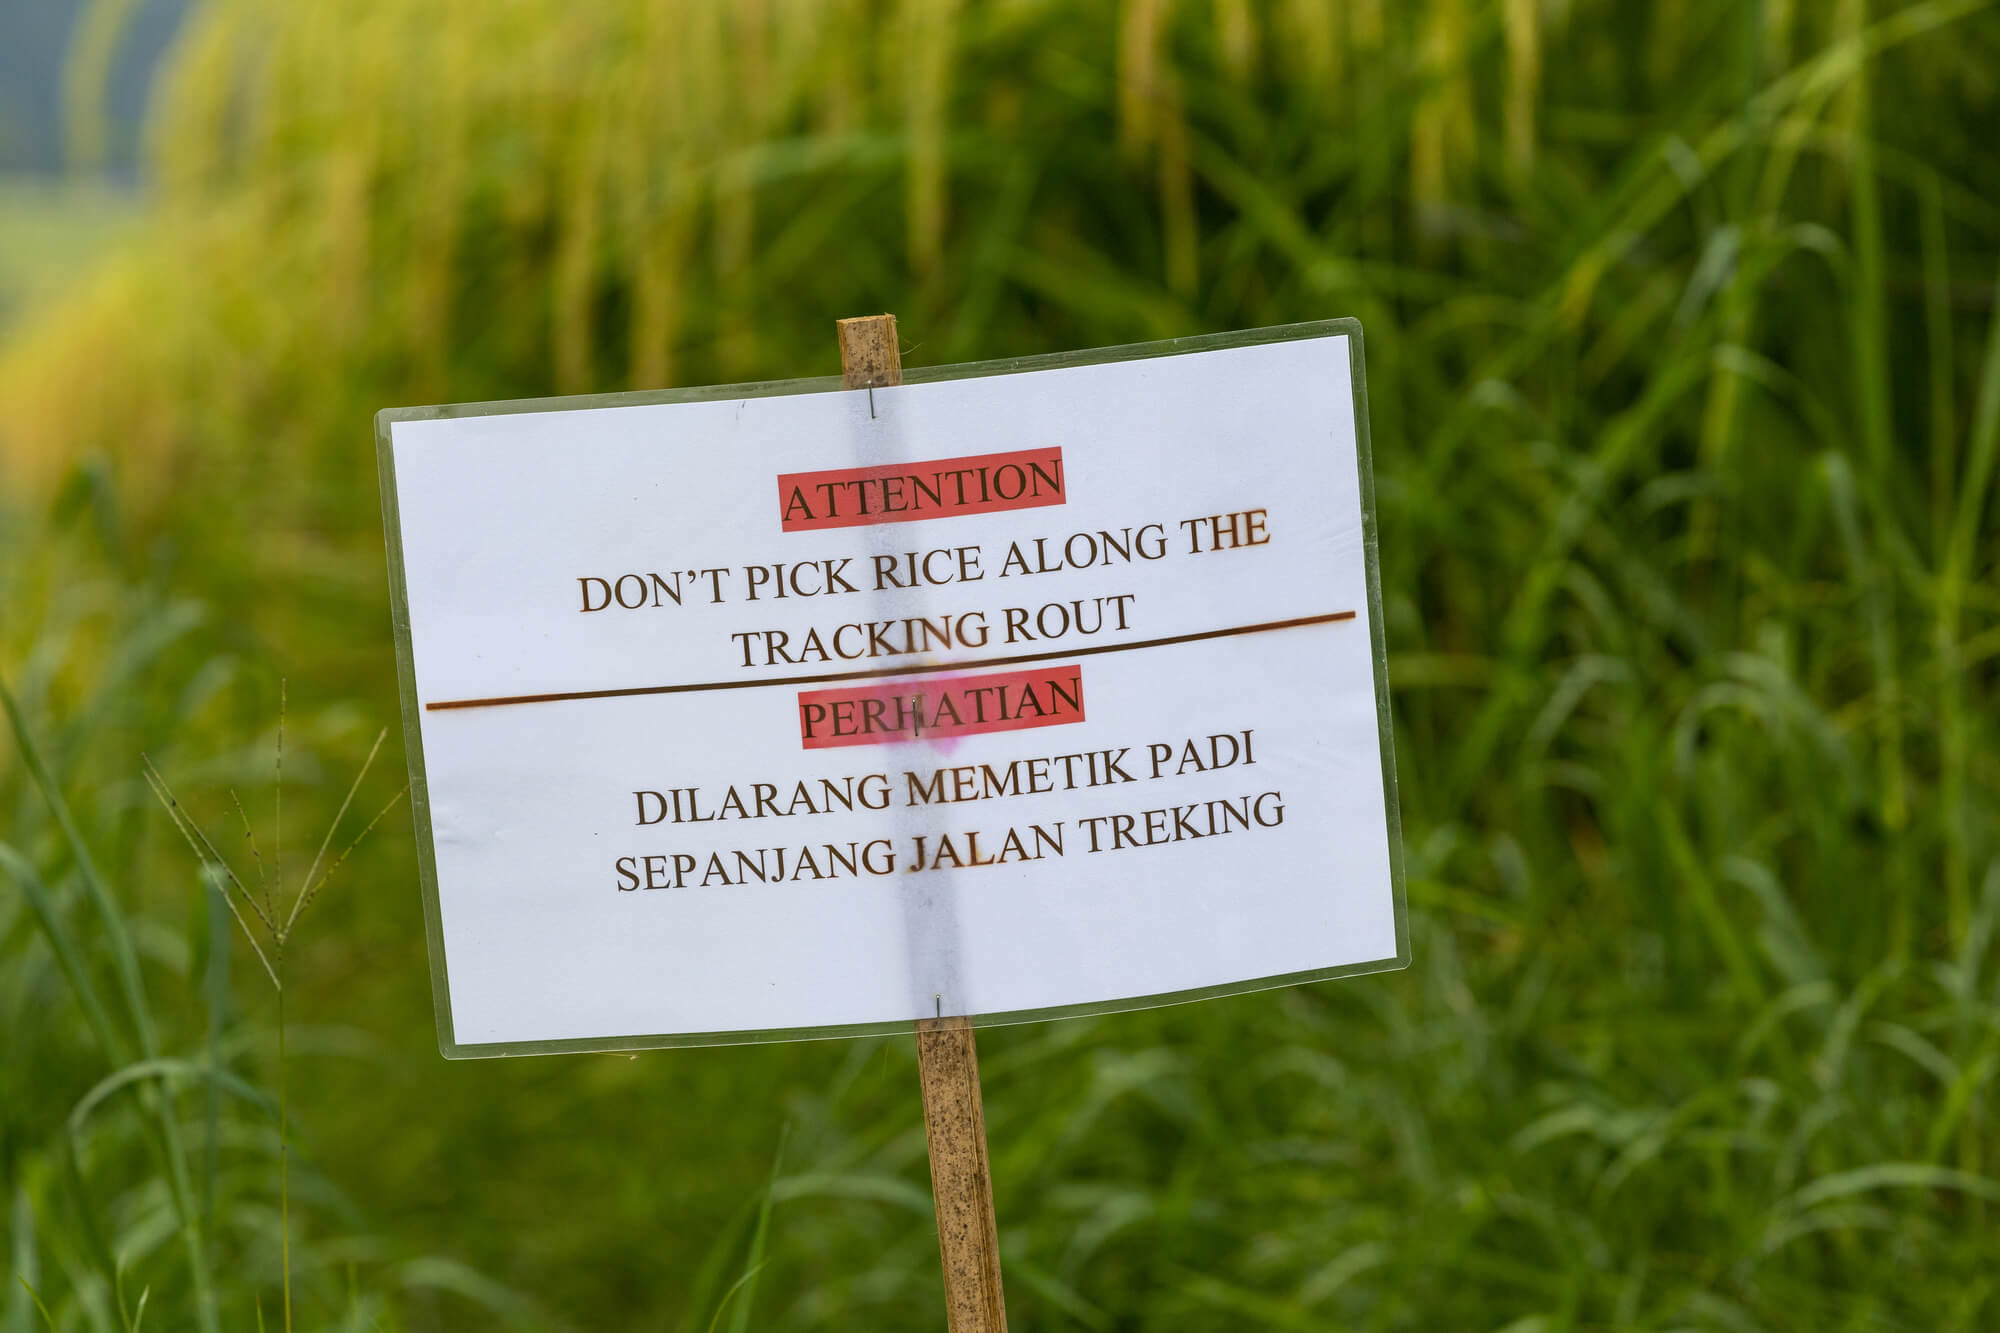 A warning sign in Jatiluwih Rice Terraces telling visitors not to pull up the rice plants